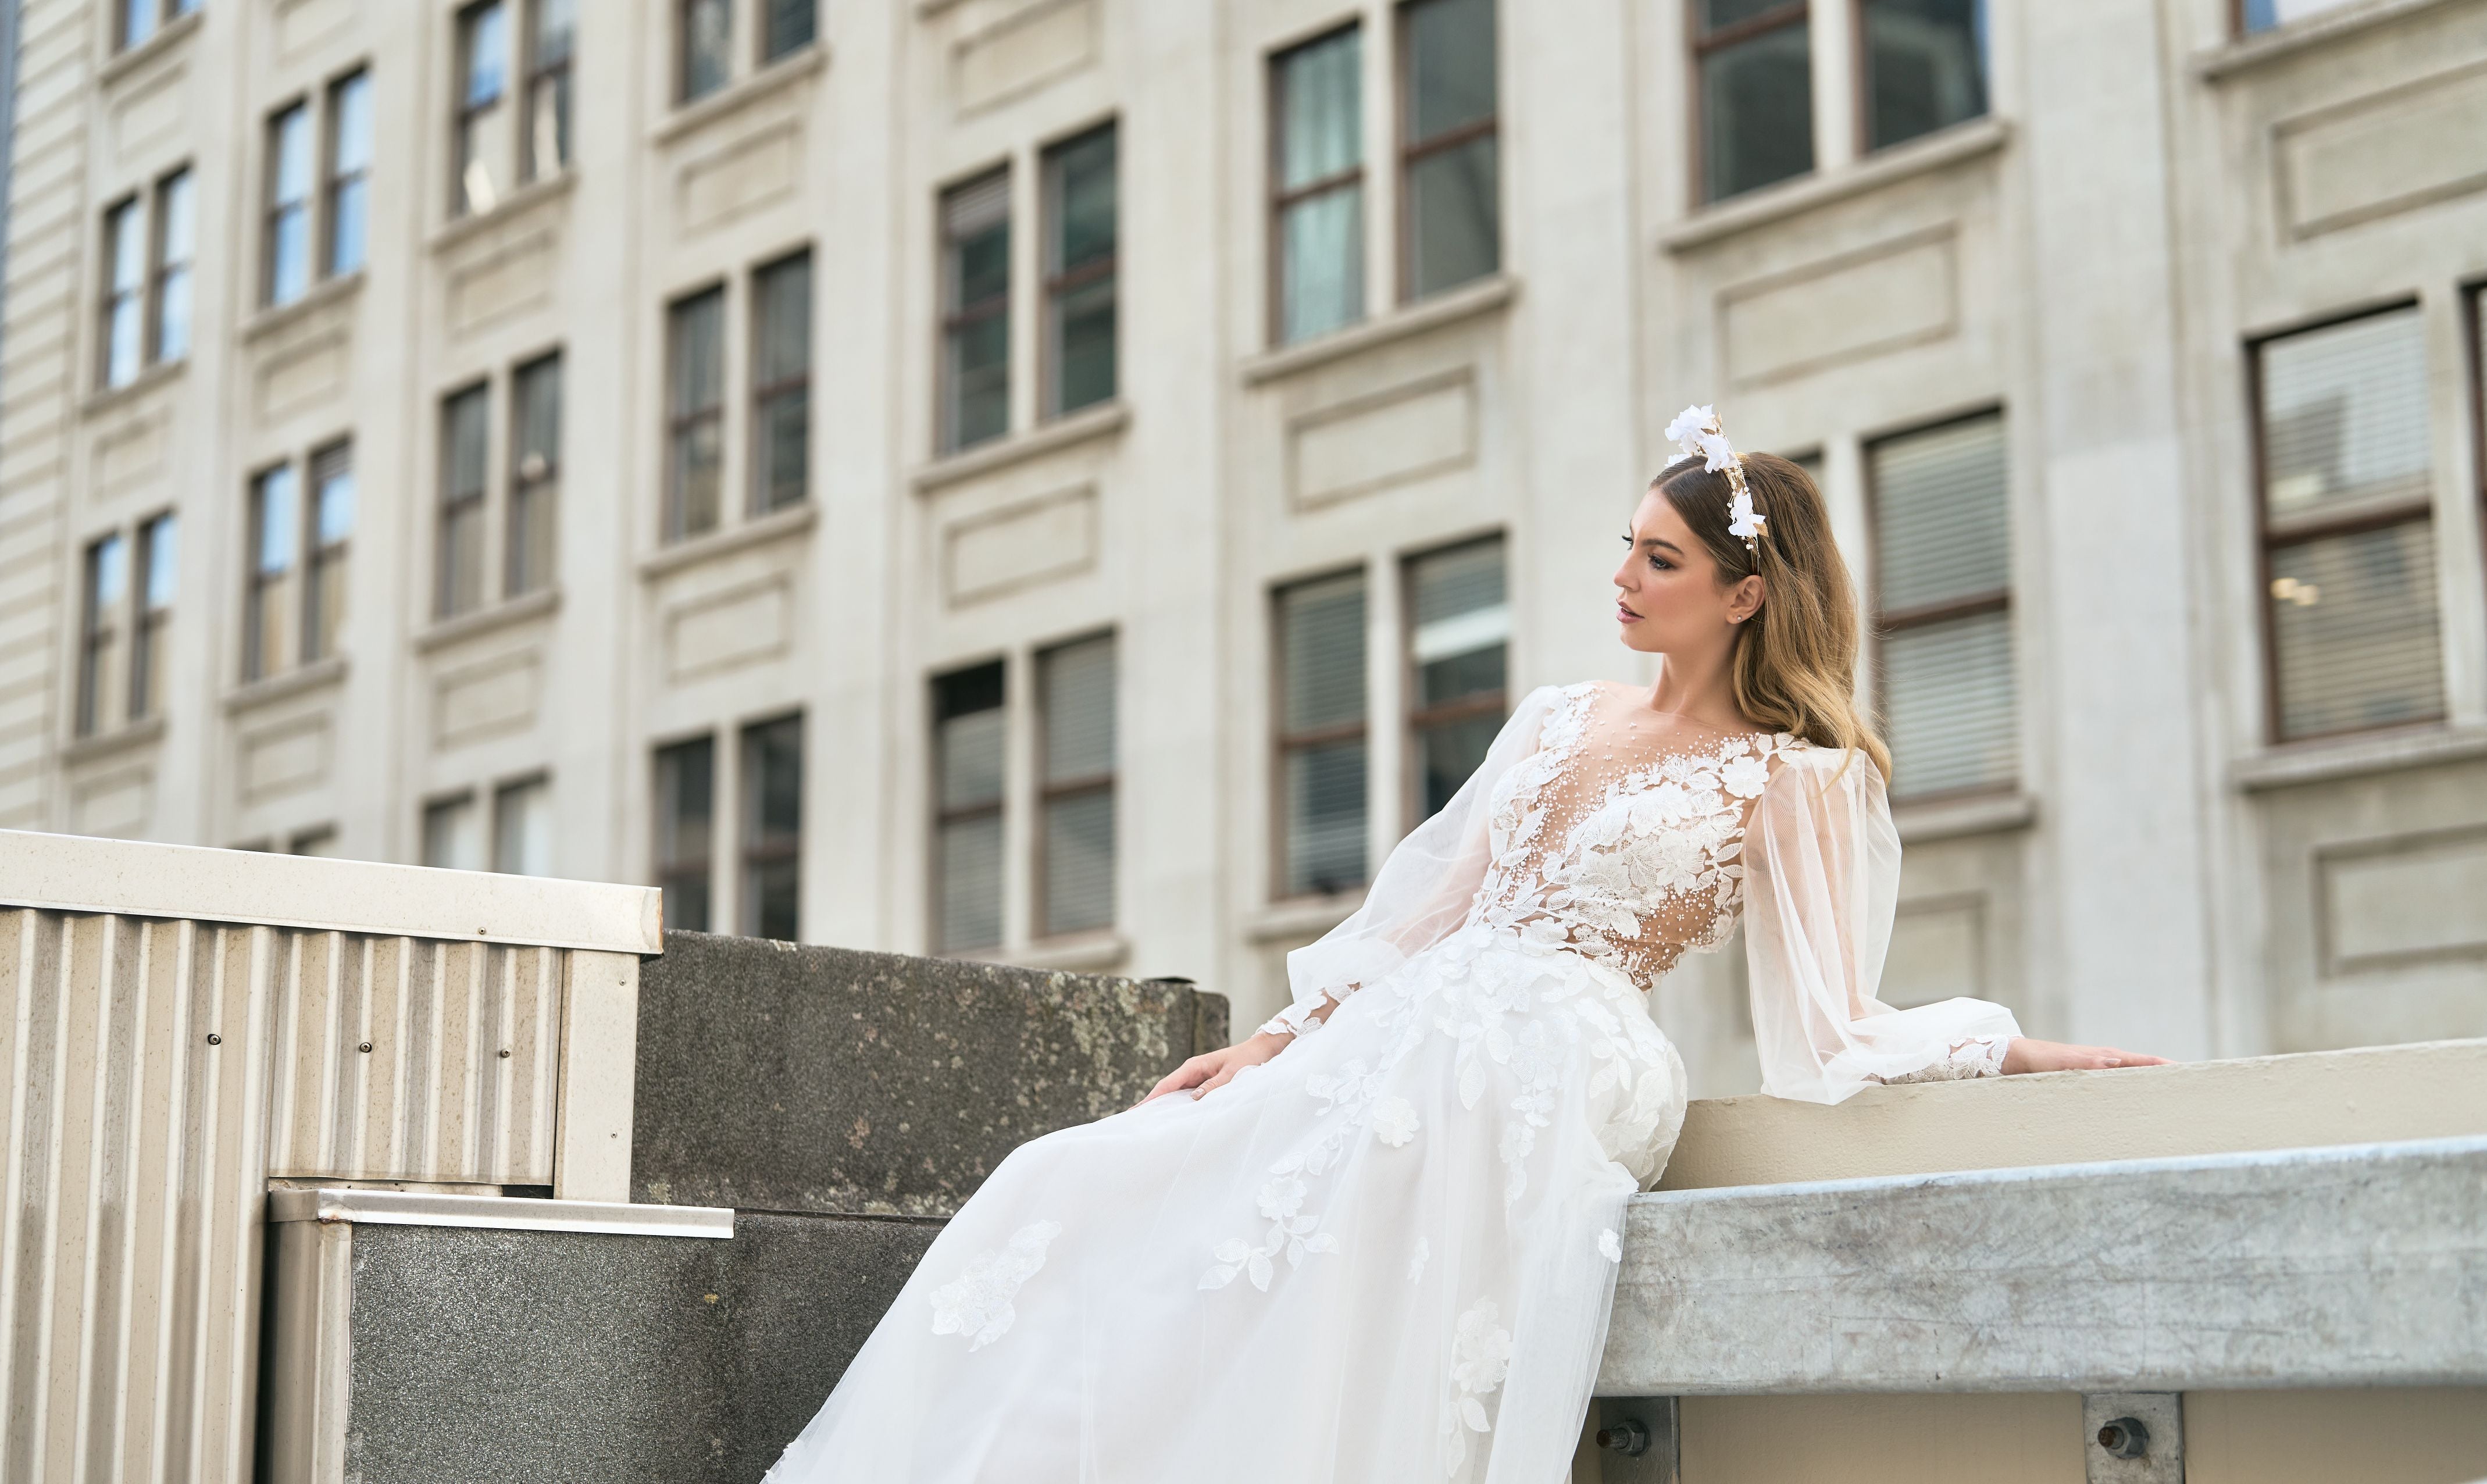 Rubi wedding dress with floral detailing on décolletage and skirt. Sheer sleeves add a delicate touch. Plunging v-neckline and A-line silhouette create an elegant and romantic look that makes you appear to be floating down the aisle.